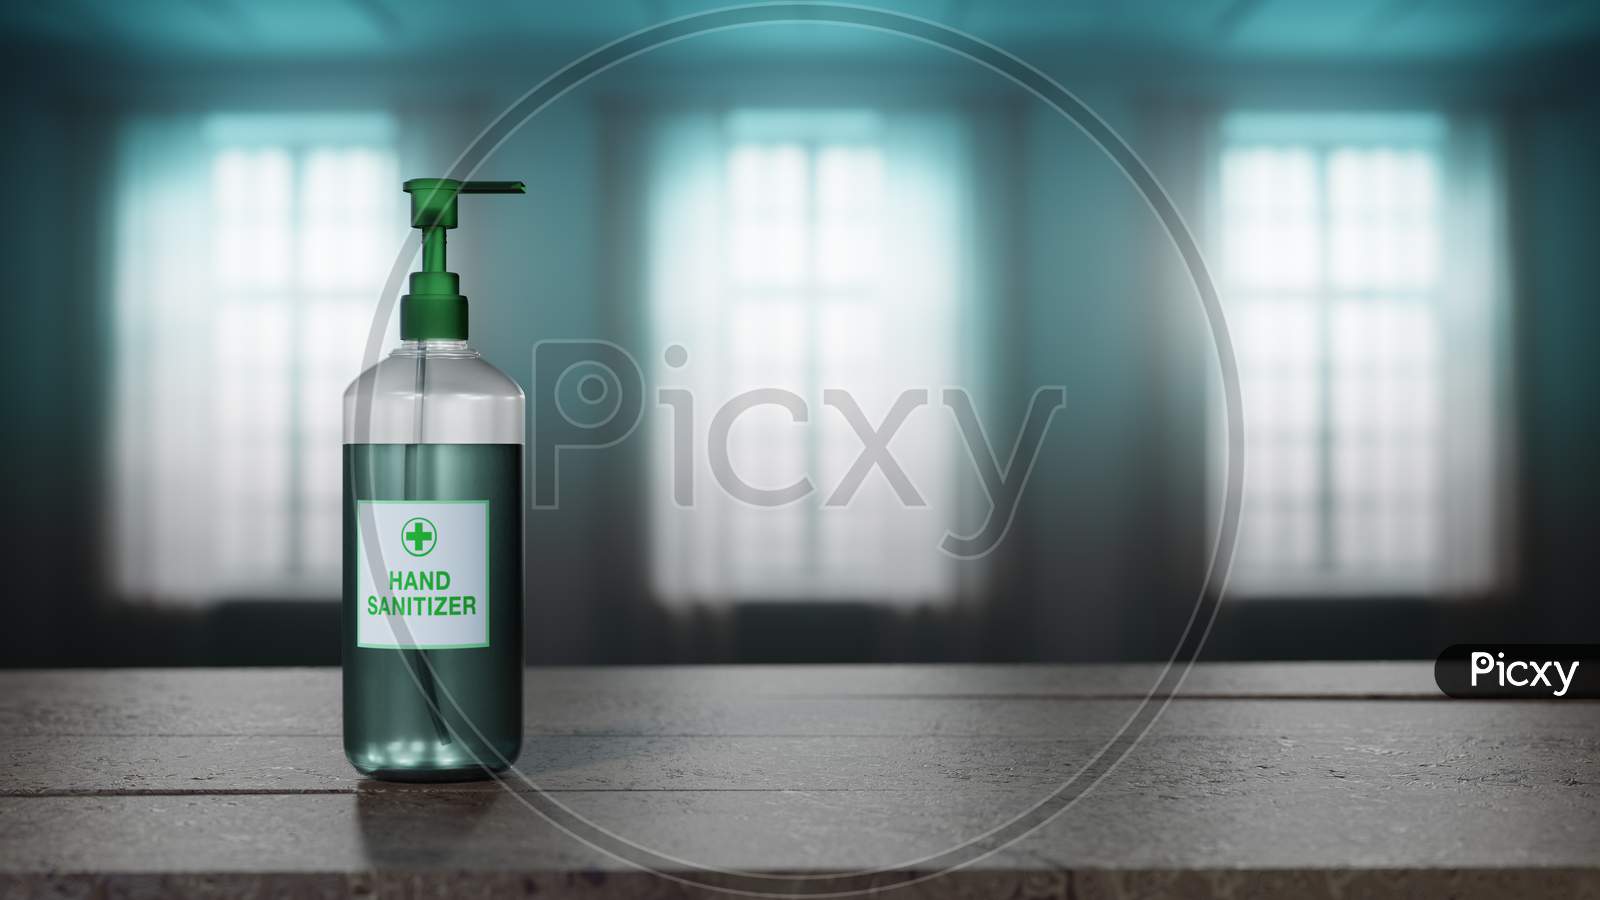 3D Render Of A Hand Sanitizer Bottle Placed On A Wooden Table Against Windows